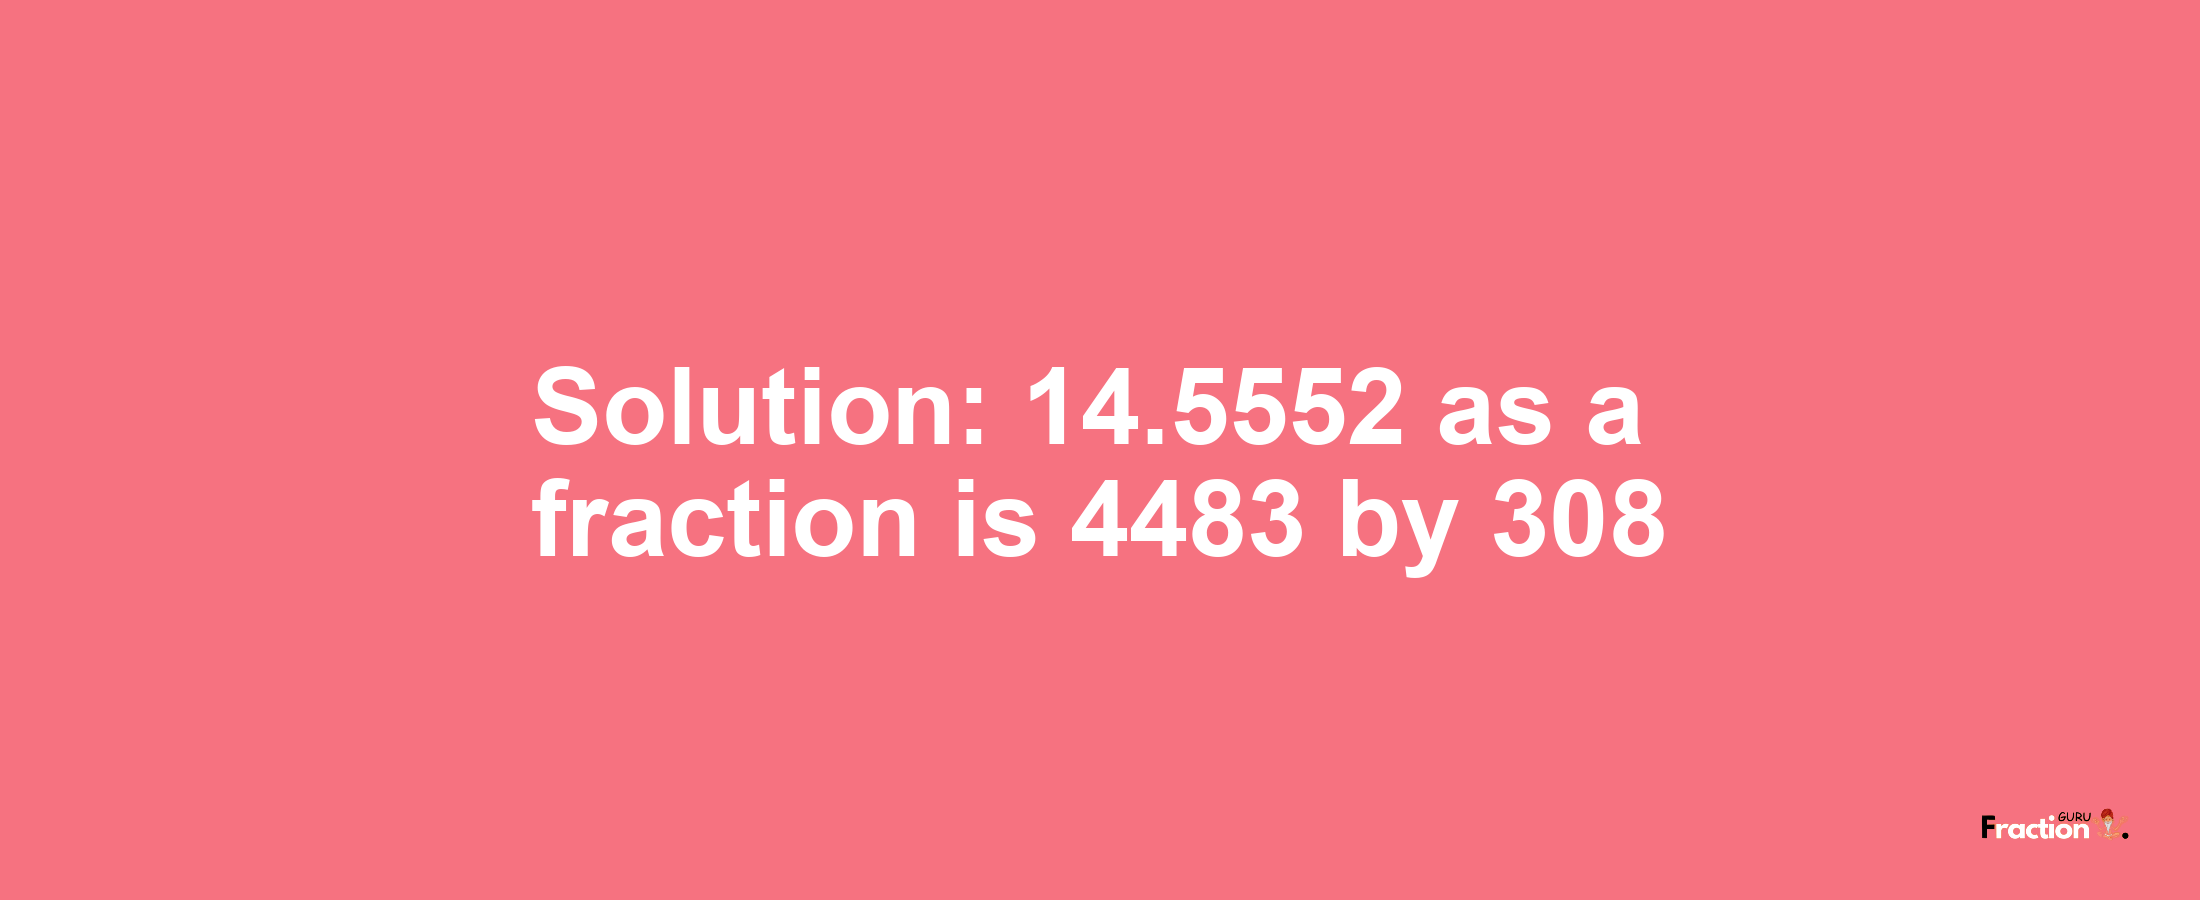 Solution:14.5552 as a fraction is 4483/308